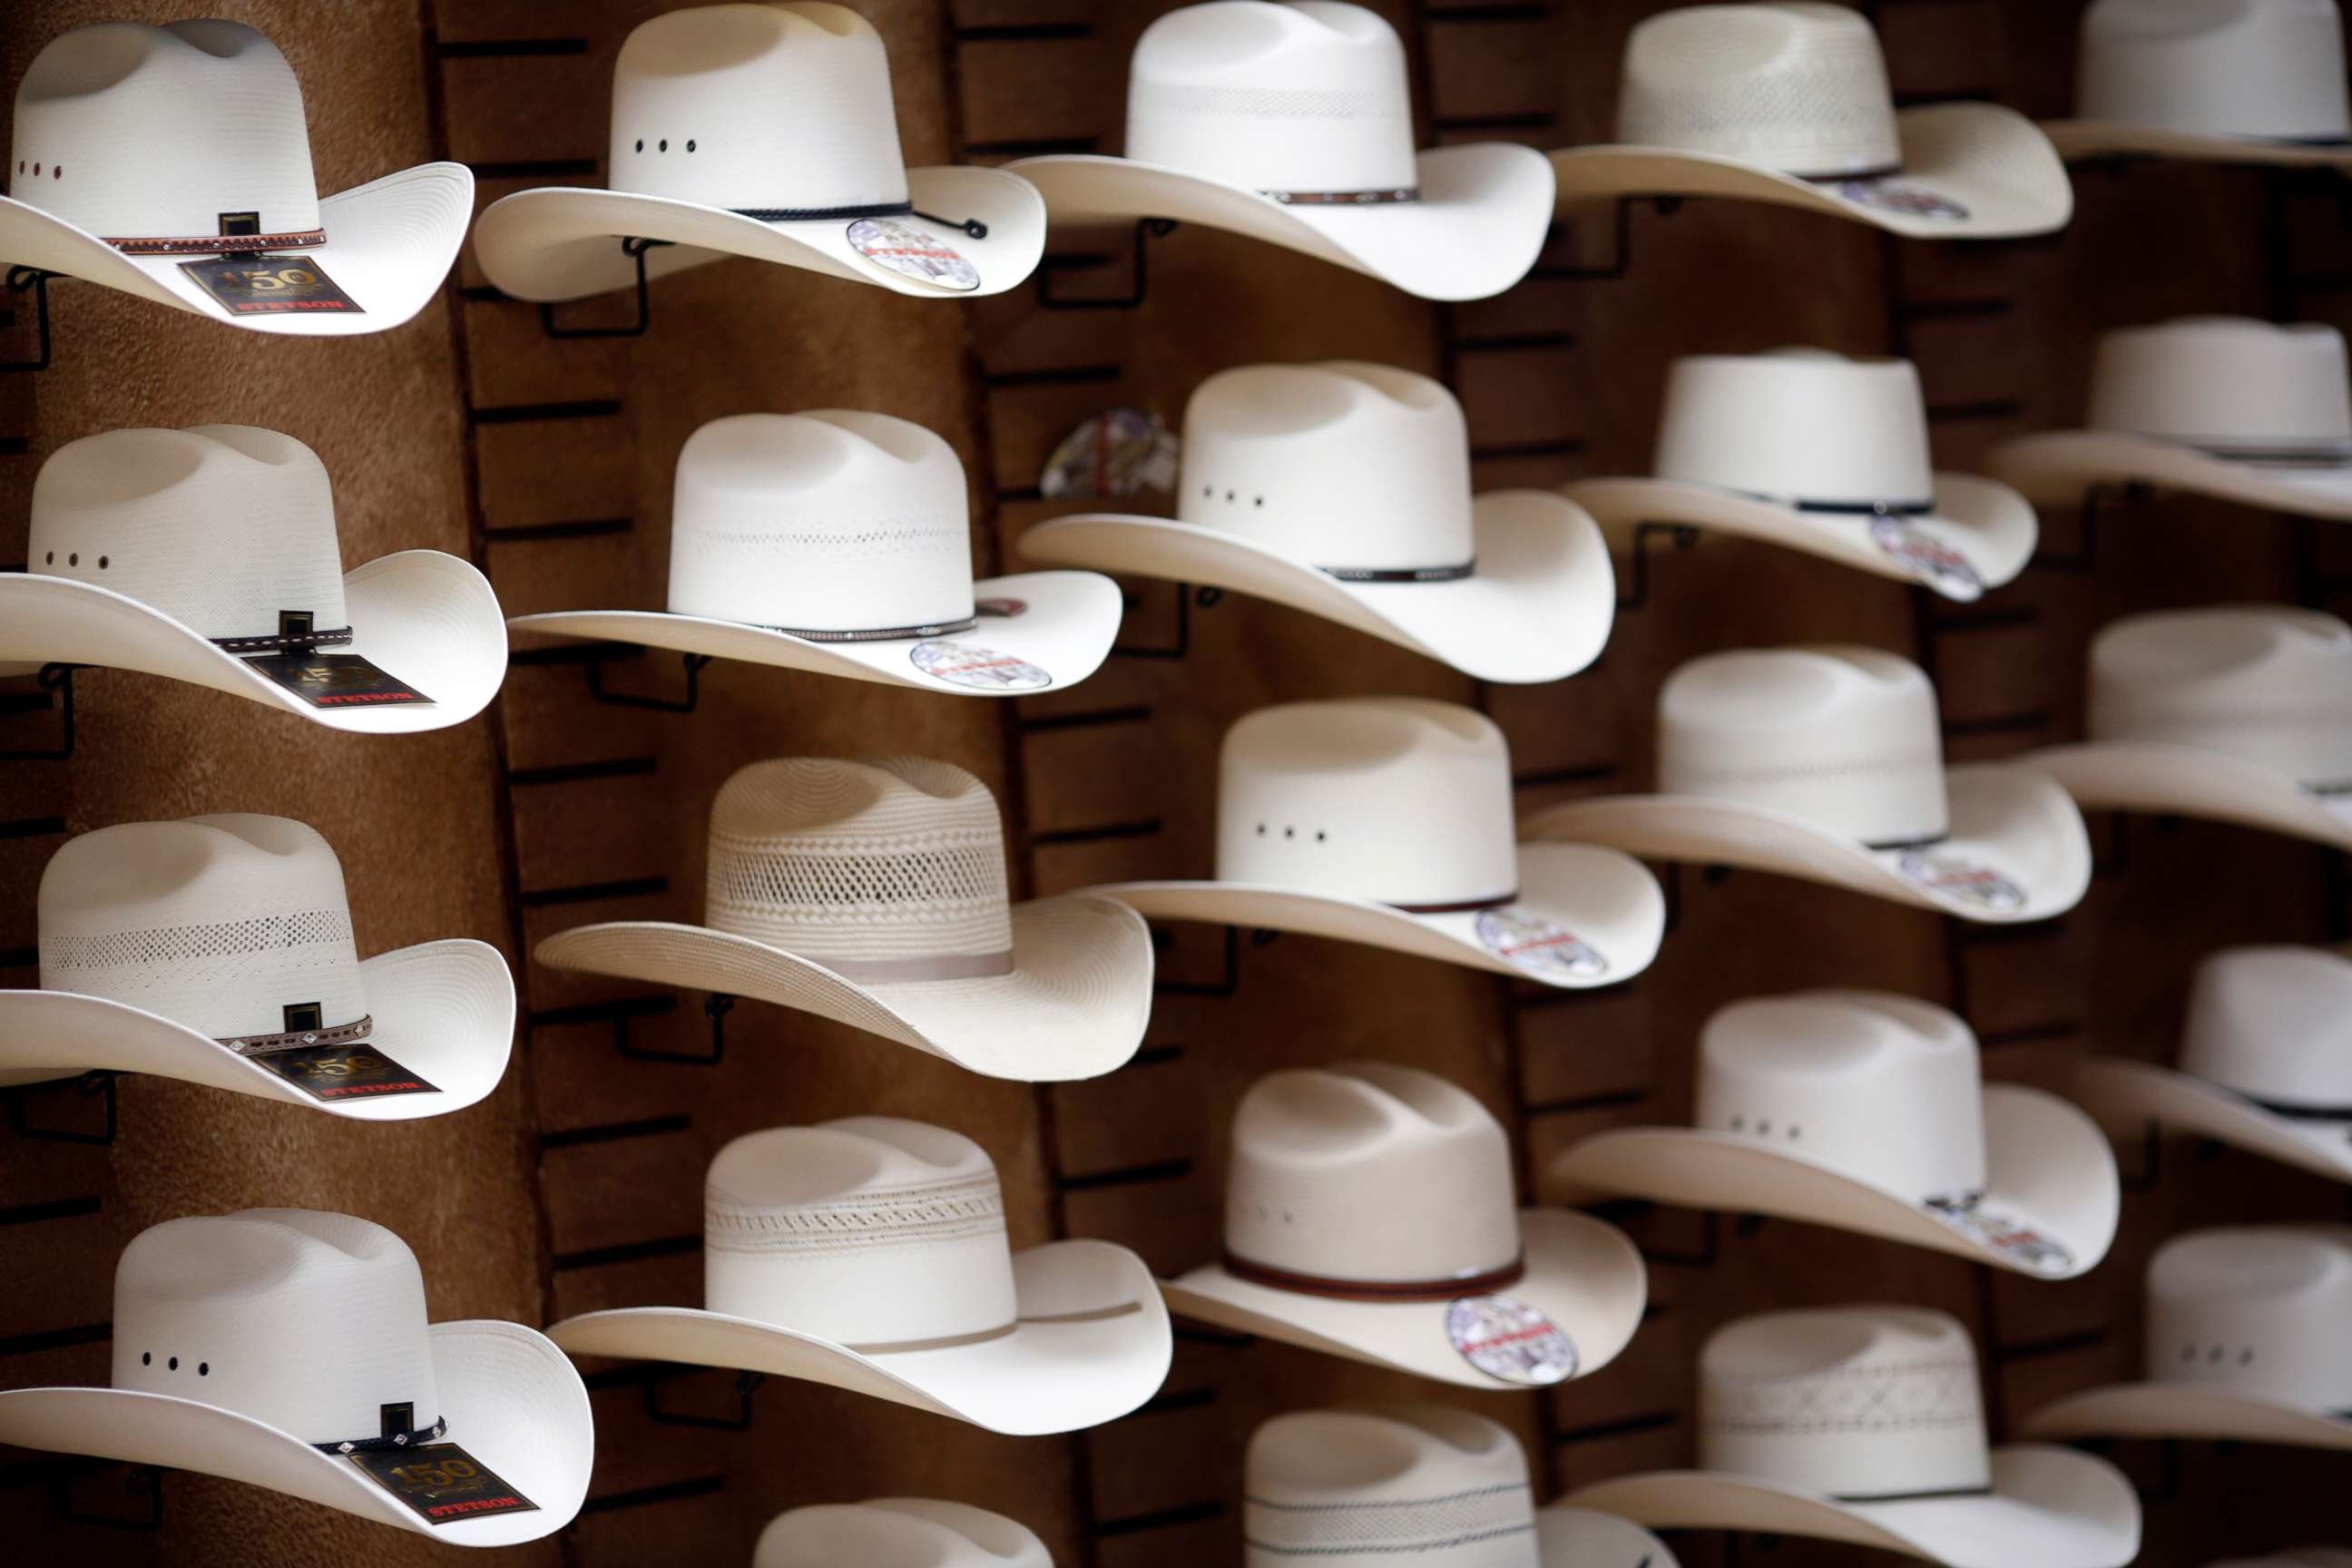 PHOTO: Stetson brand cowboy hats are displayed on a wall inside the showroom of the Hatco Inc. manufacturing facility in Garland, Texas, Aug. 28, 2015.